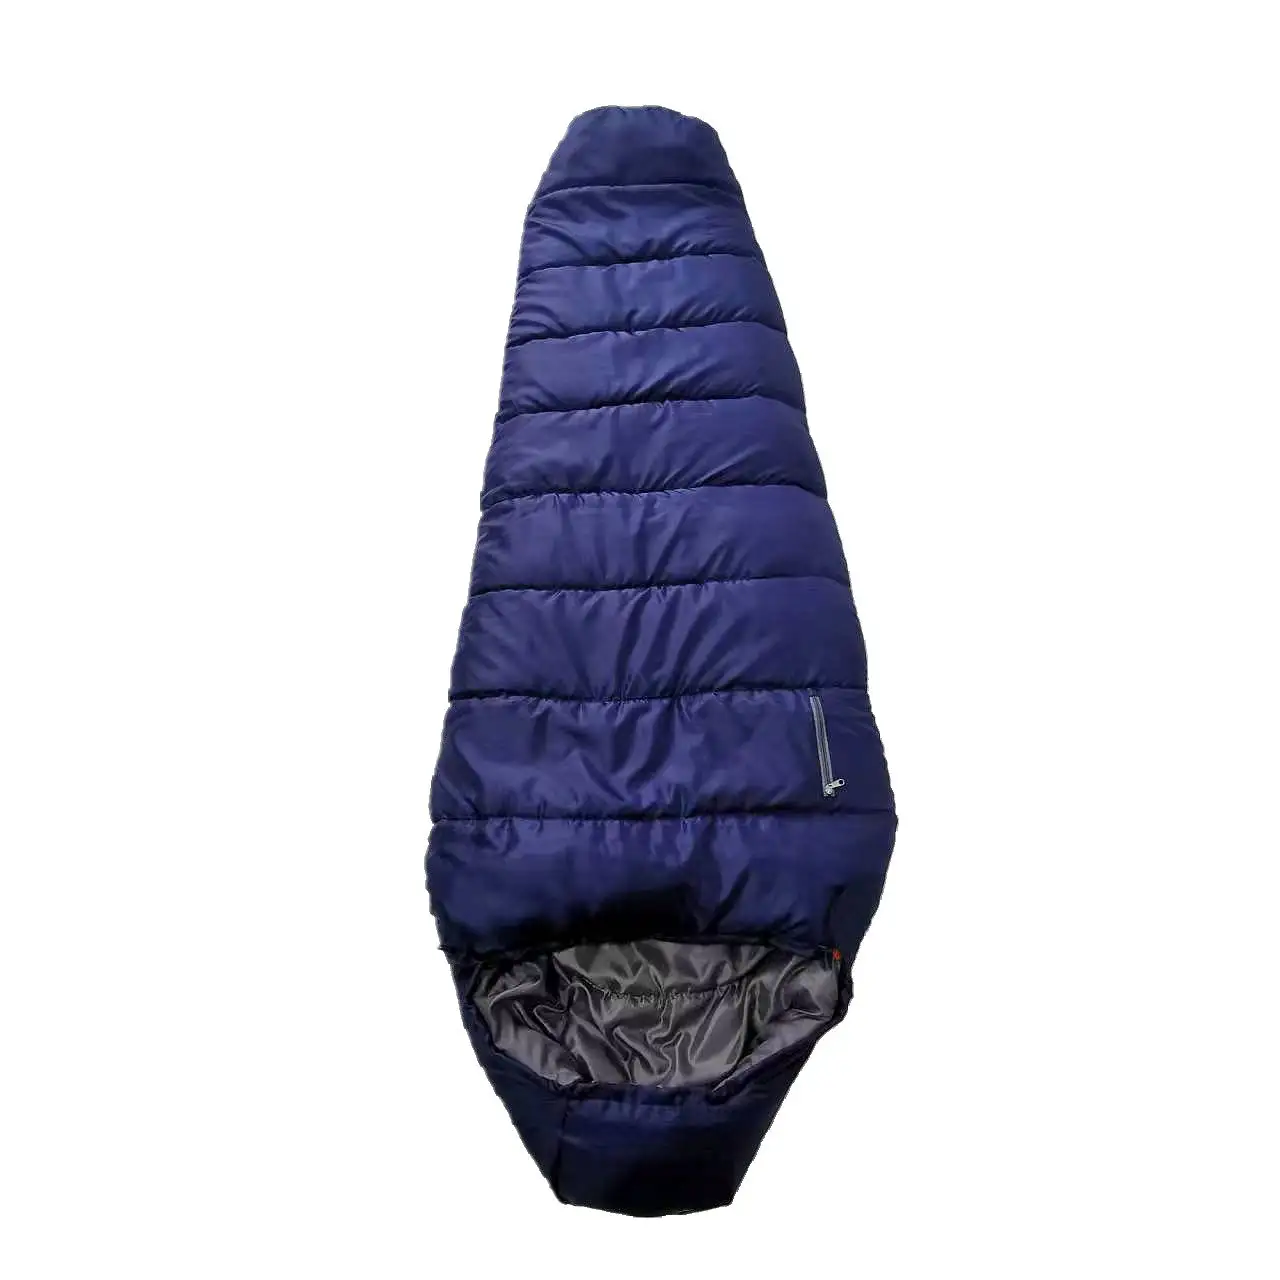 Hot sale manufacturer adult mummy sleeping bag for outdoor camping travel hiking backpacking emergency supplies